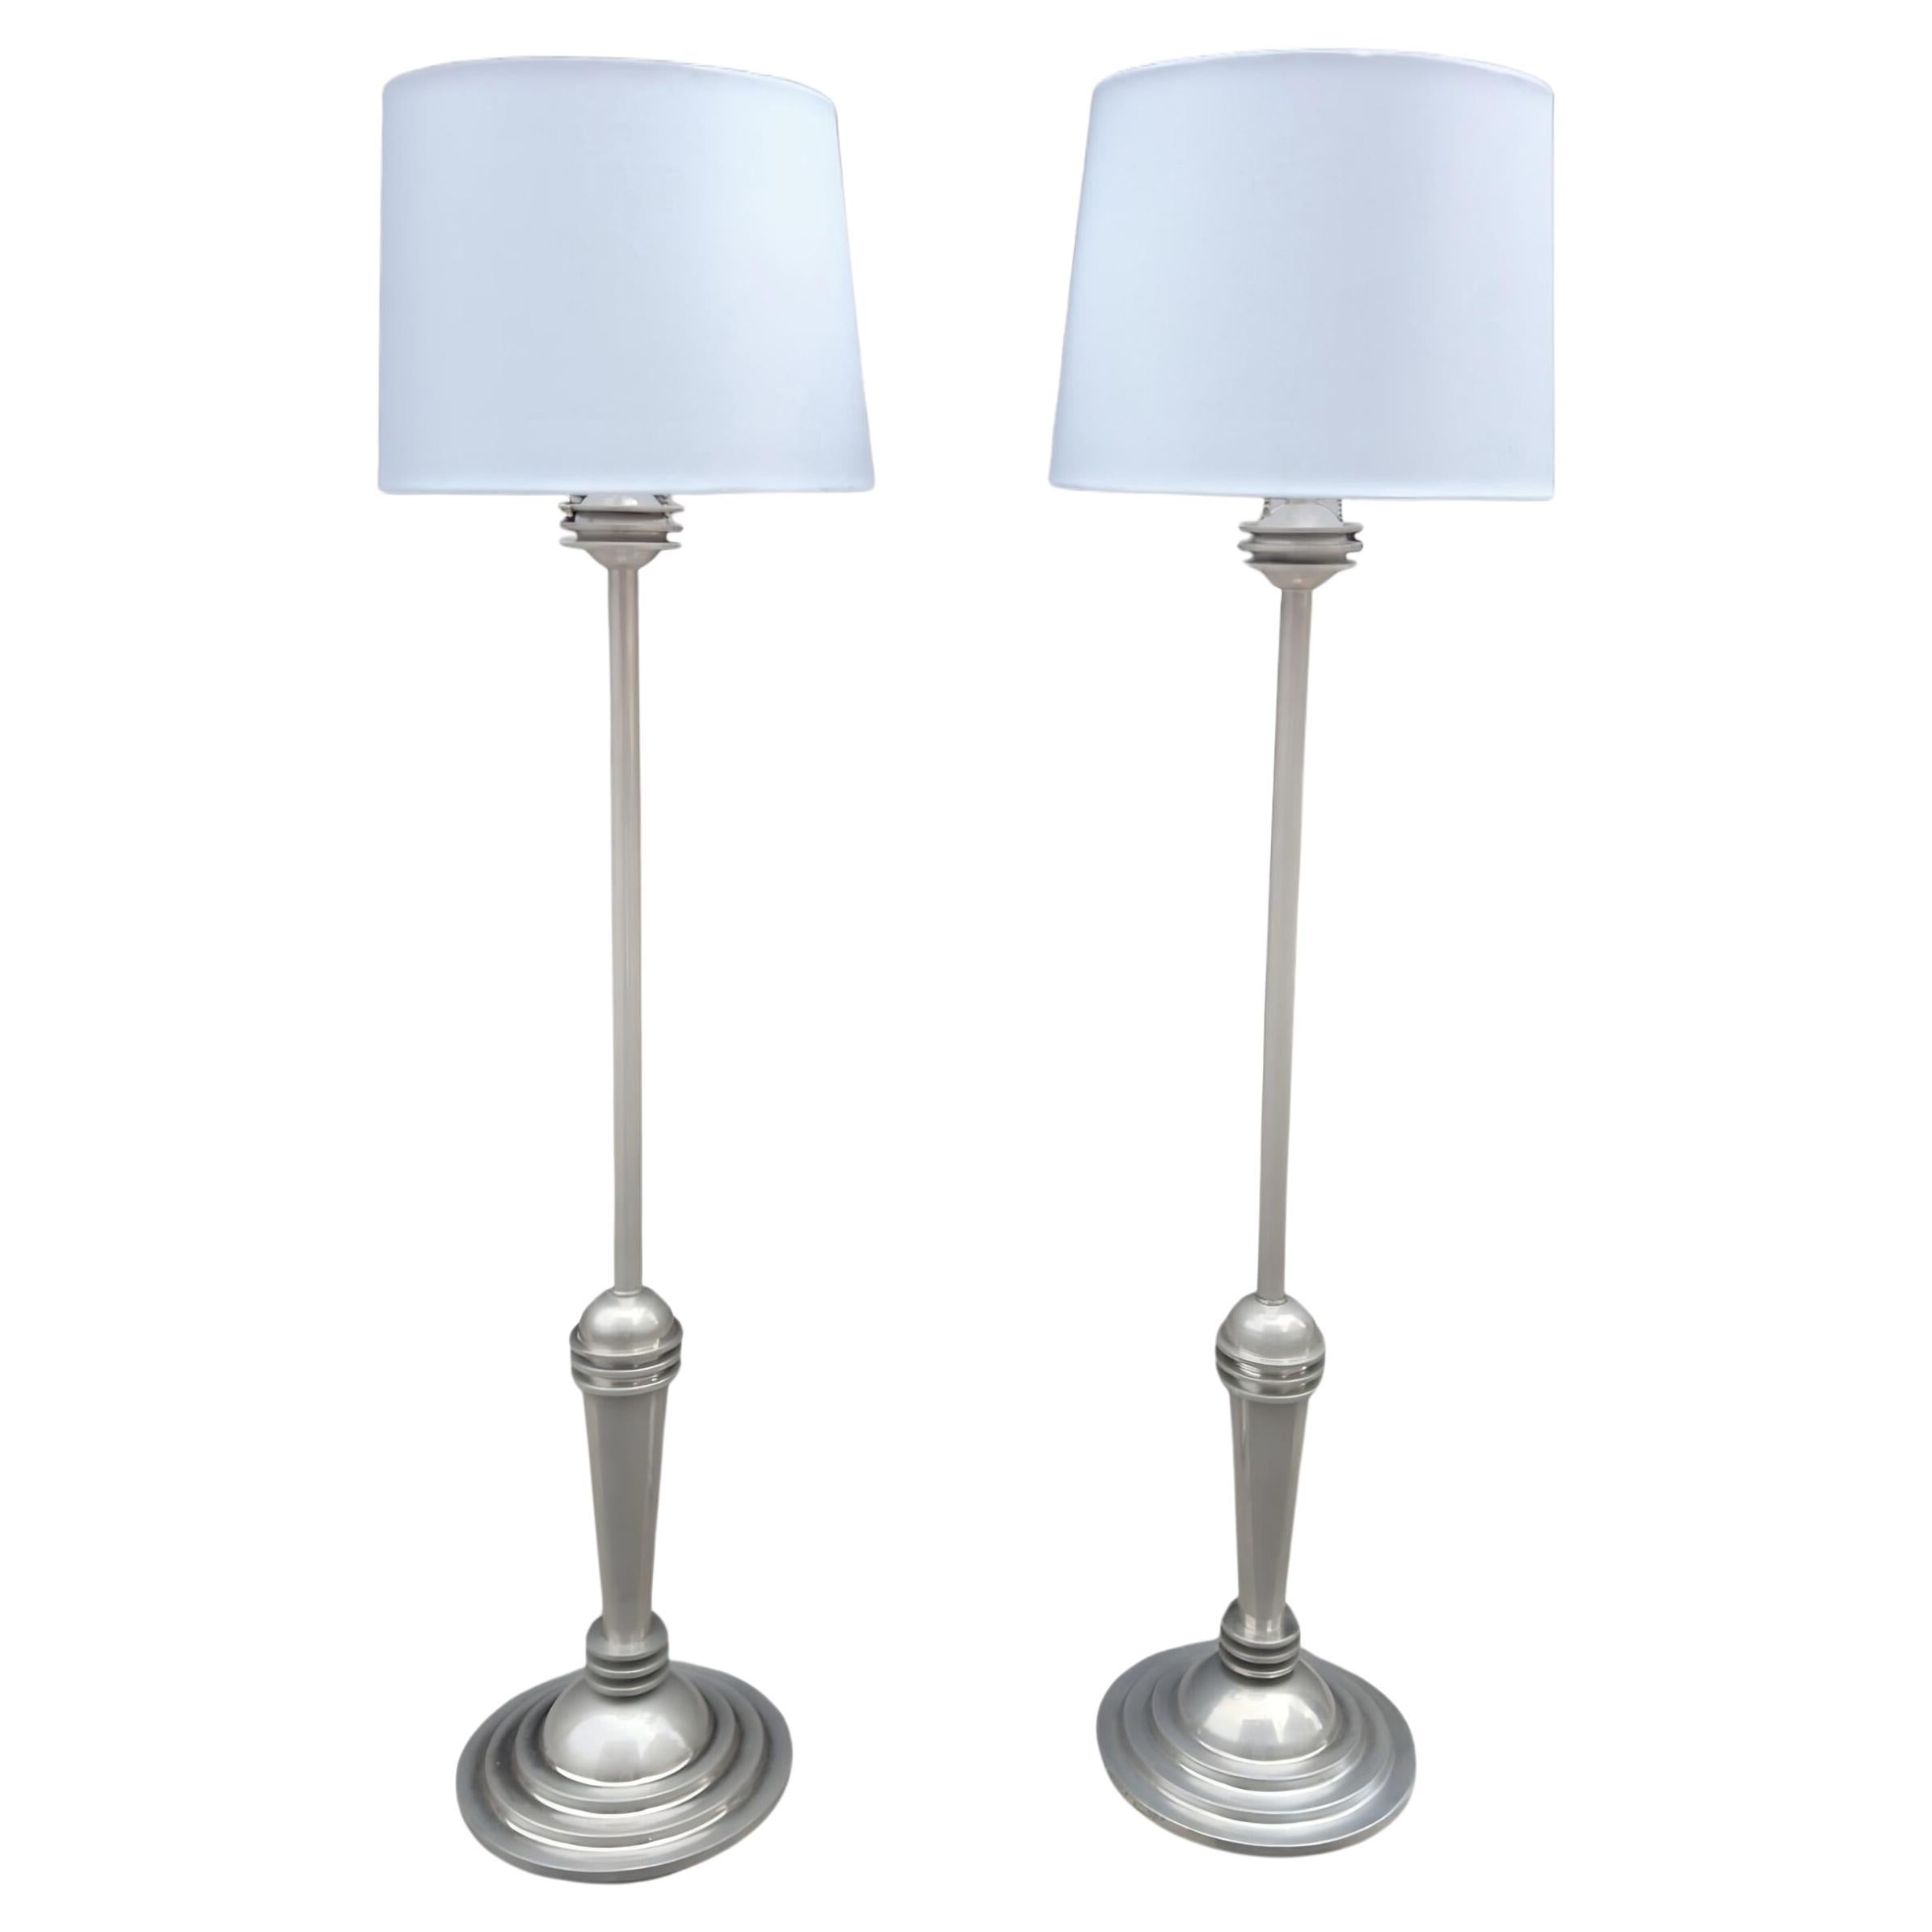 Pair of Late 20th Century Chrome Art Deco Floor Lamps by Woka Labs